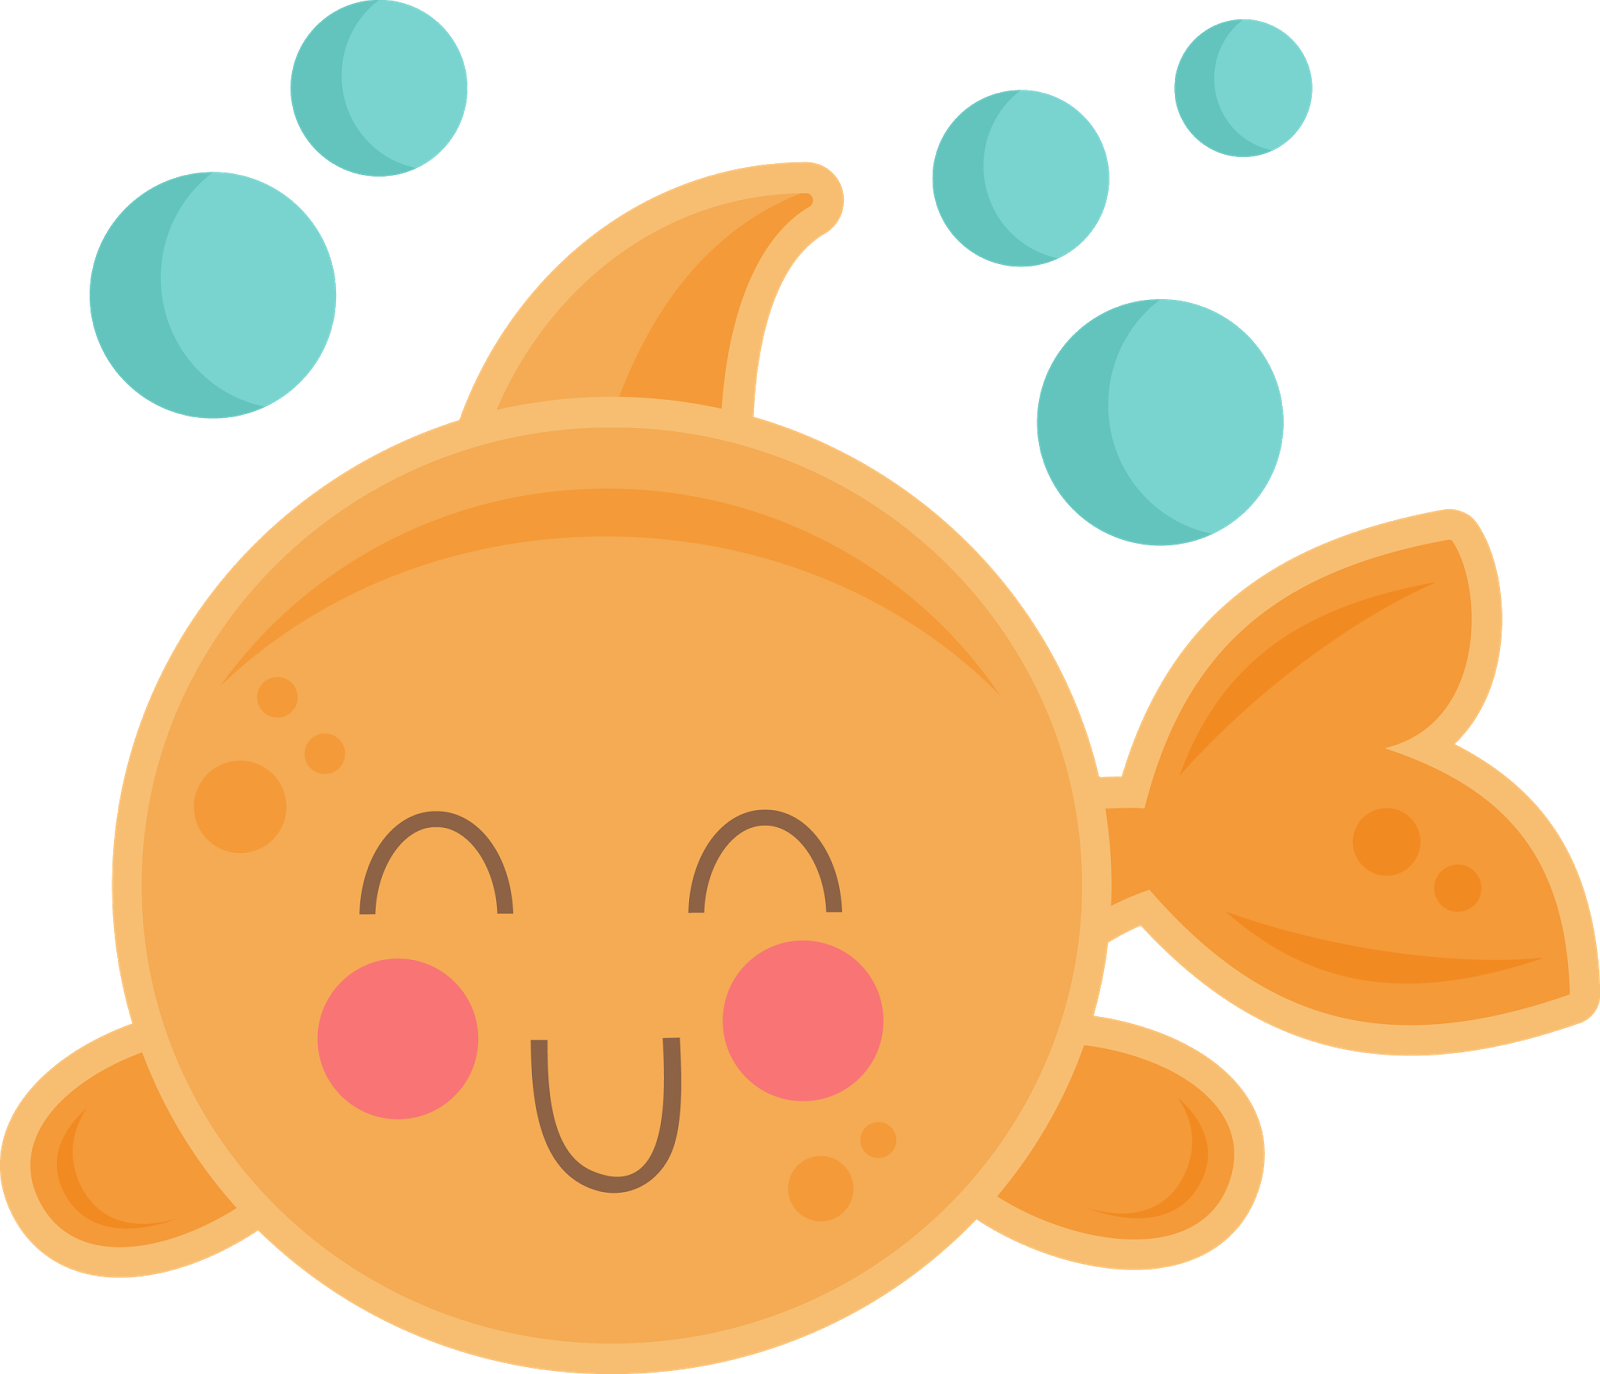 Nose clipart happy. Fish drawing at getdrawings